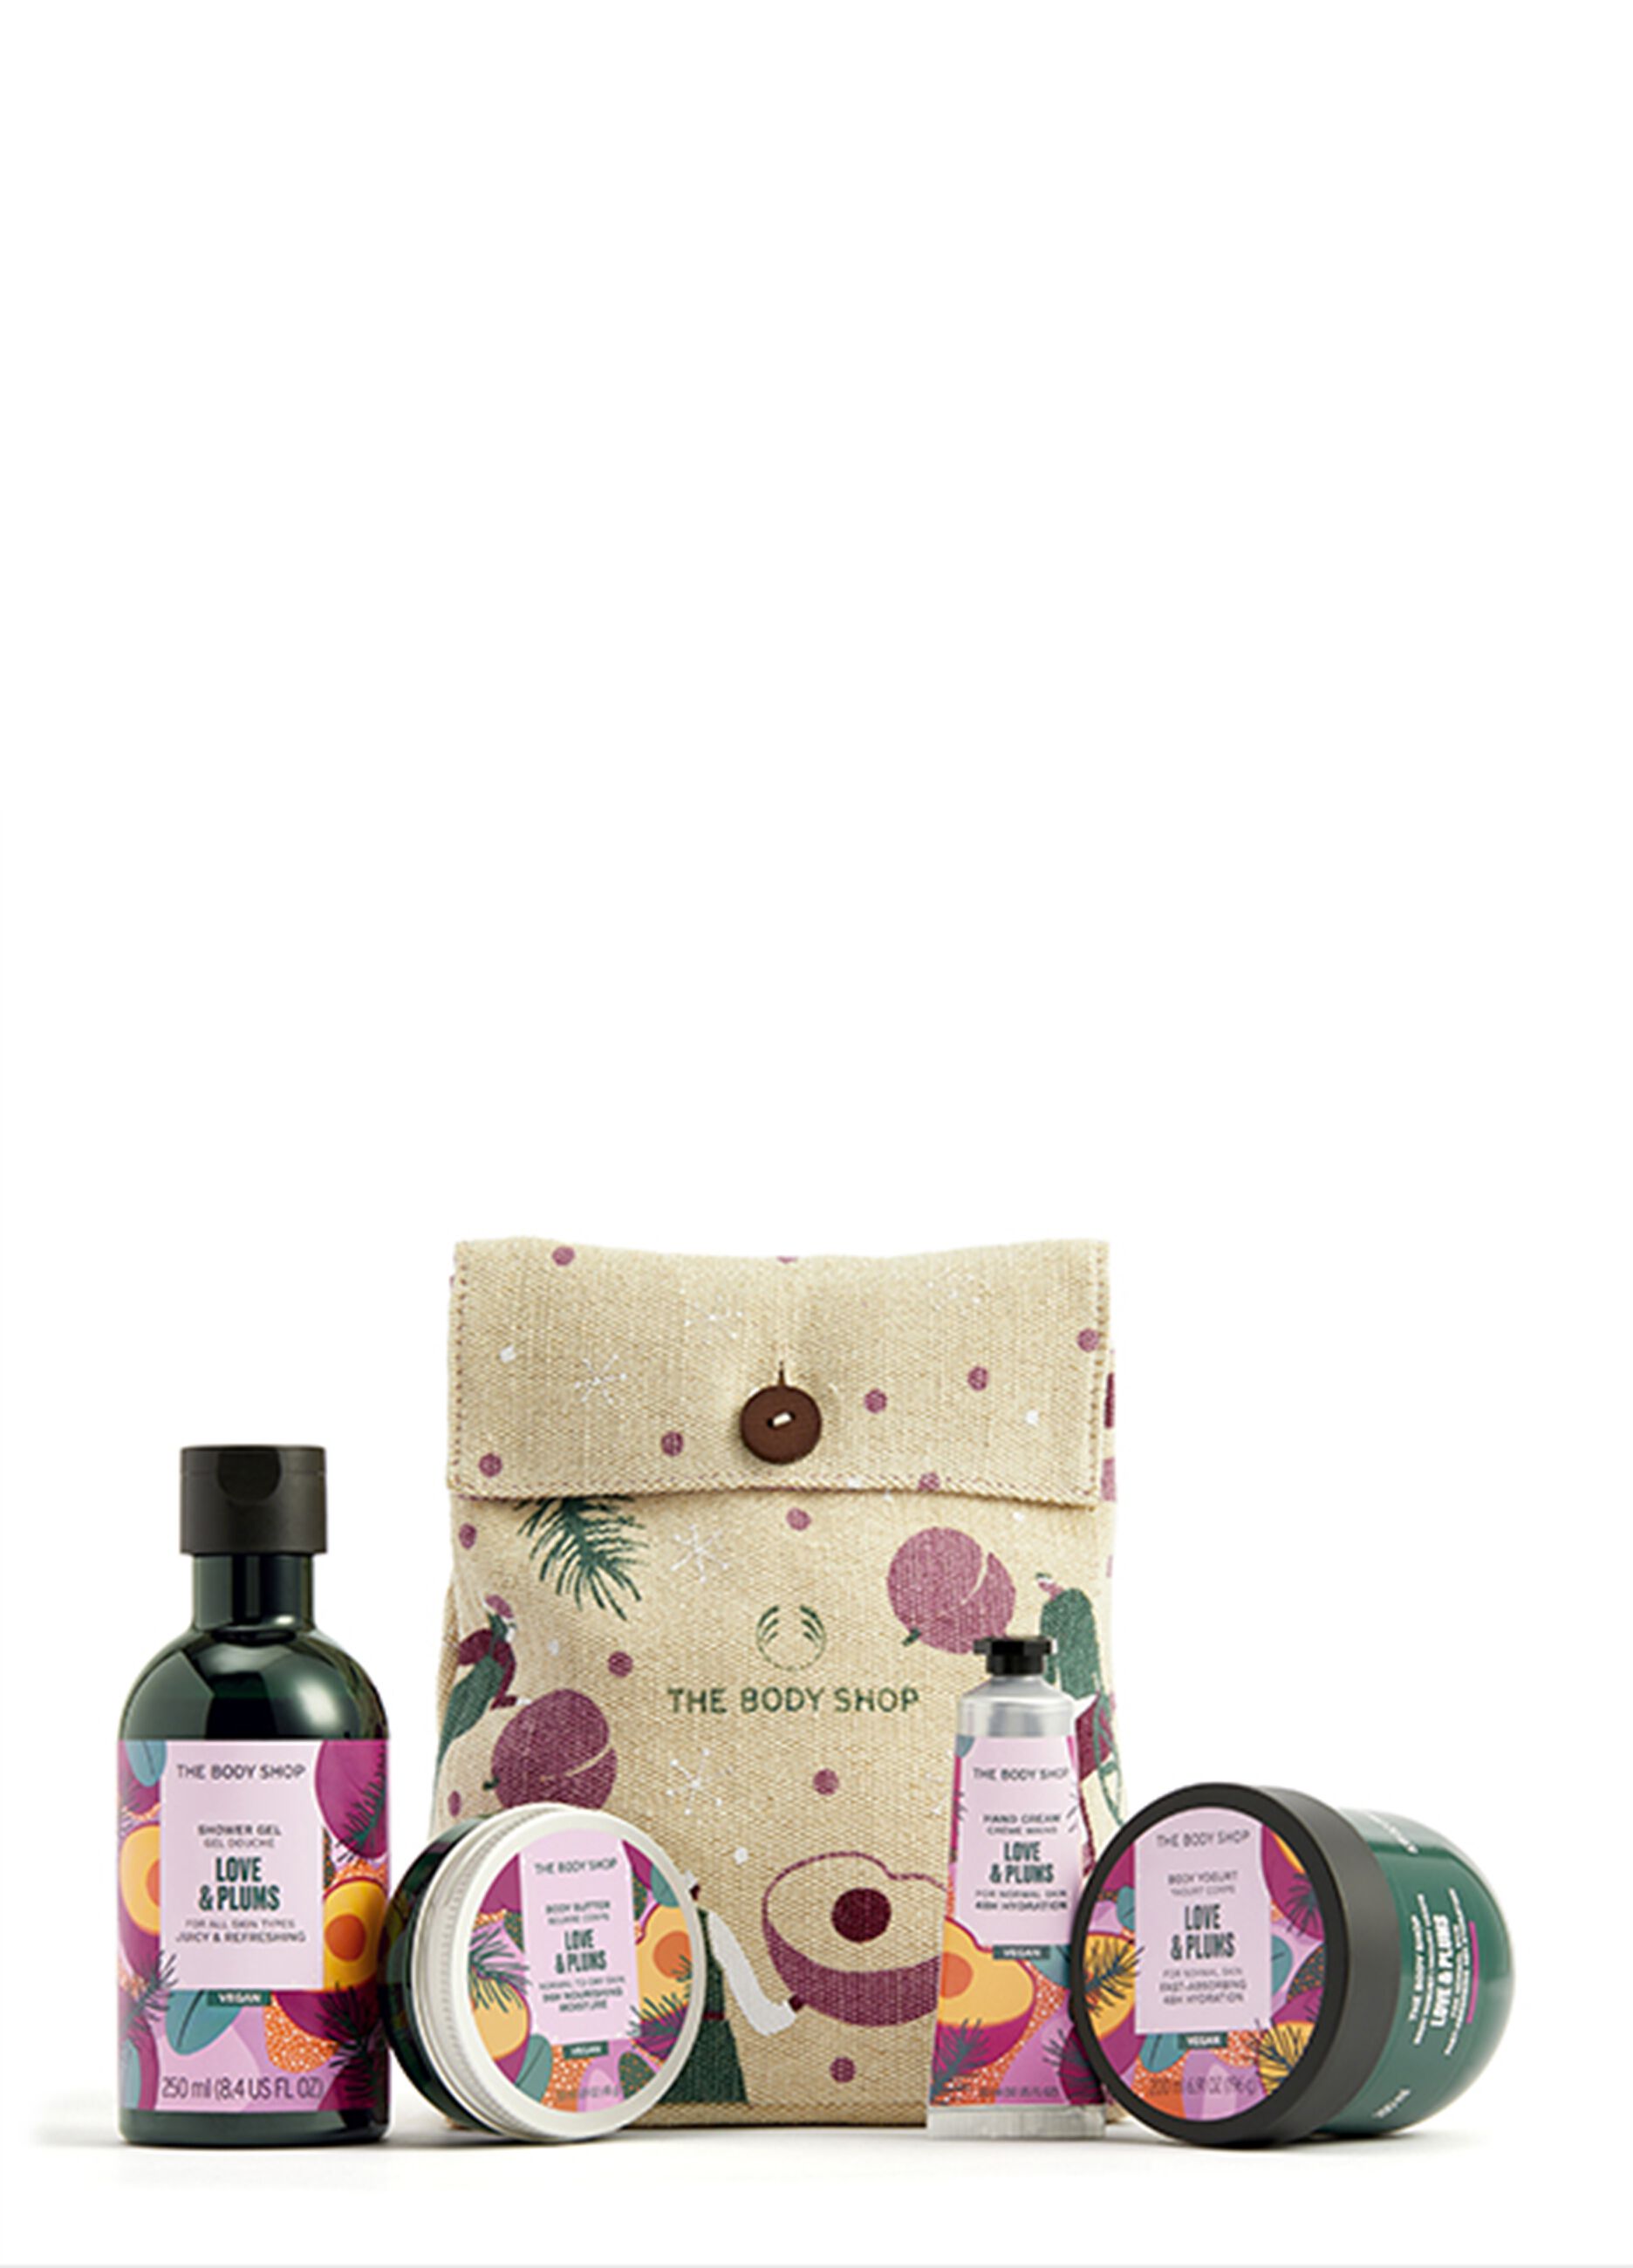 The Body Shop Love & Plums small gift box